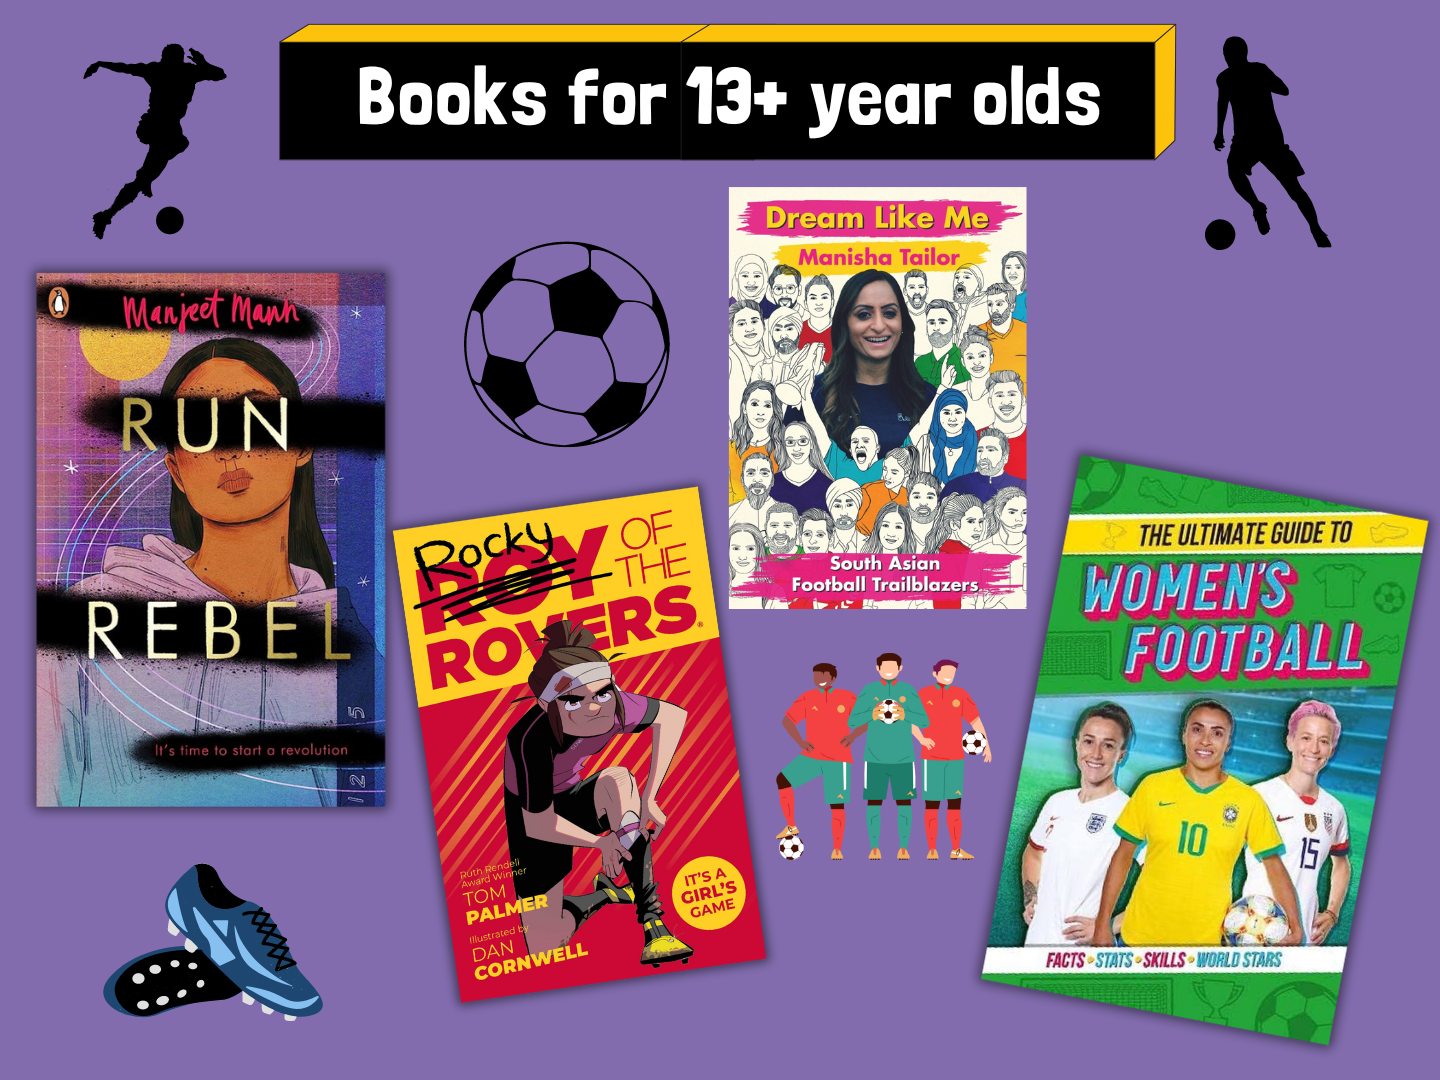 Books for 13+ year olds